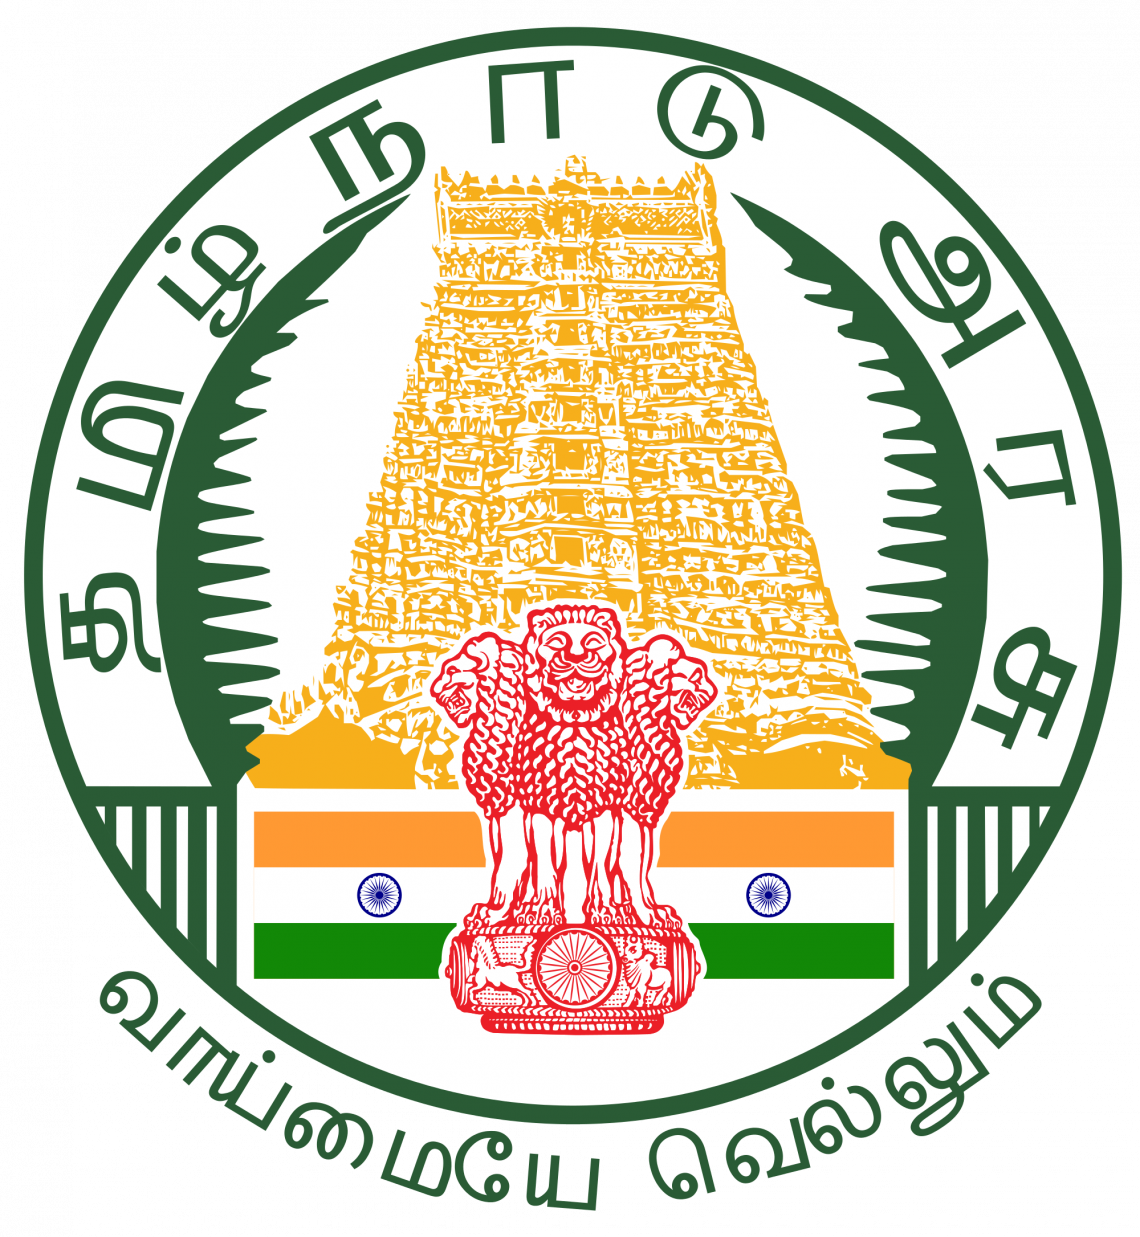 Tamil Nadu exams 2018 Exam Dates for class 10th, 11th and 12th is